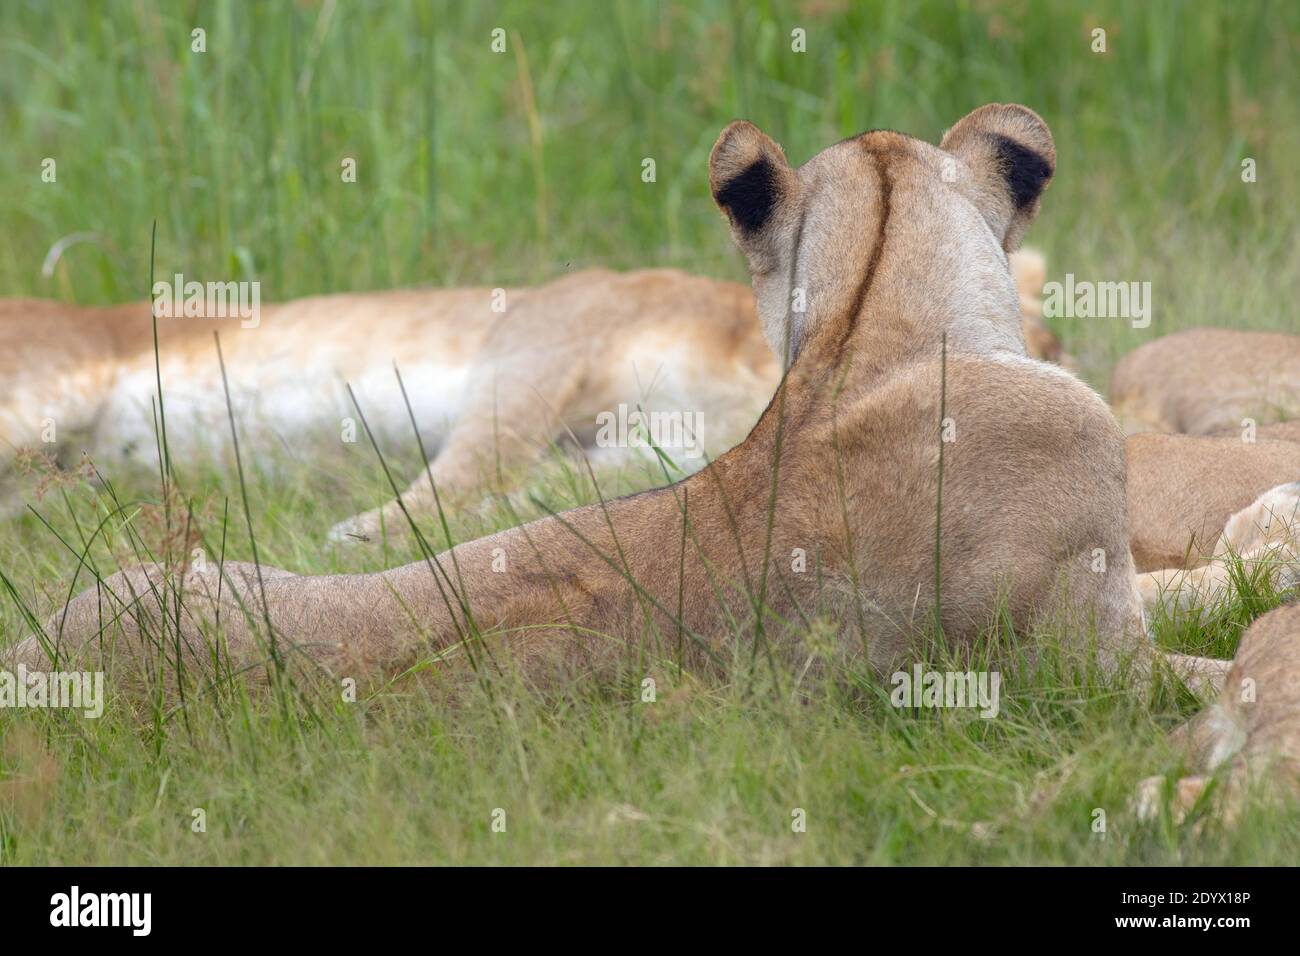 African Lion (Panthera leo). Reclining lioness, facing away, showing dark vertebral stripe originating from back of head, dark patches back of ears. Stock Photo